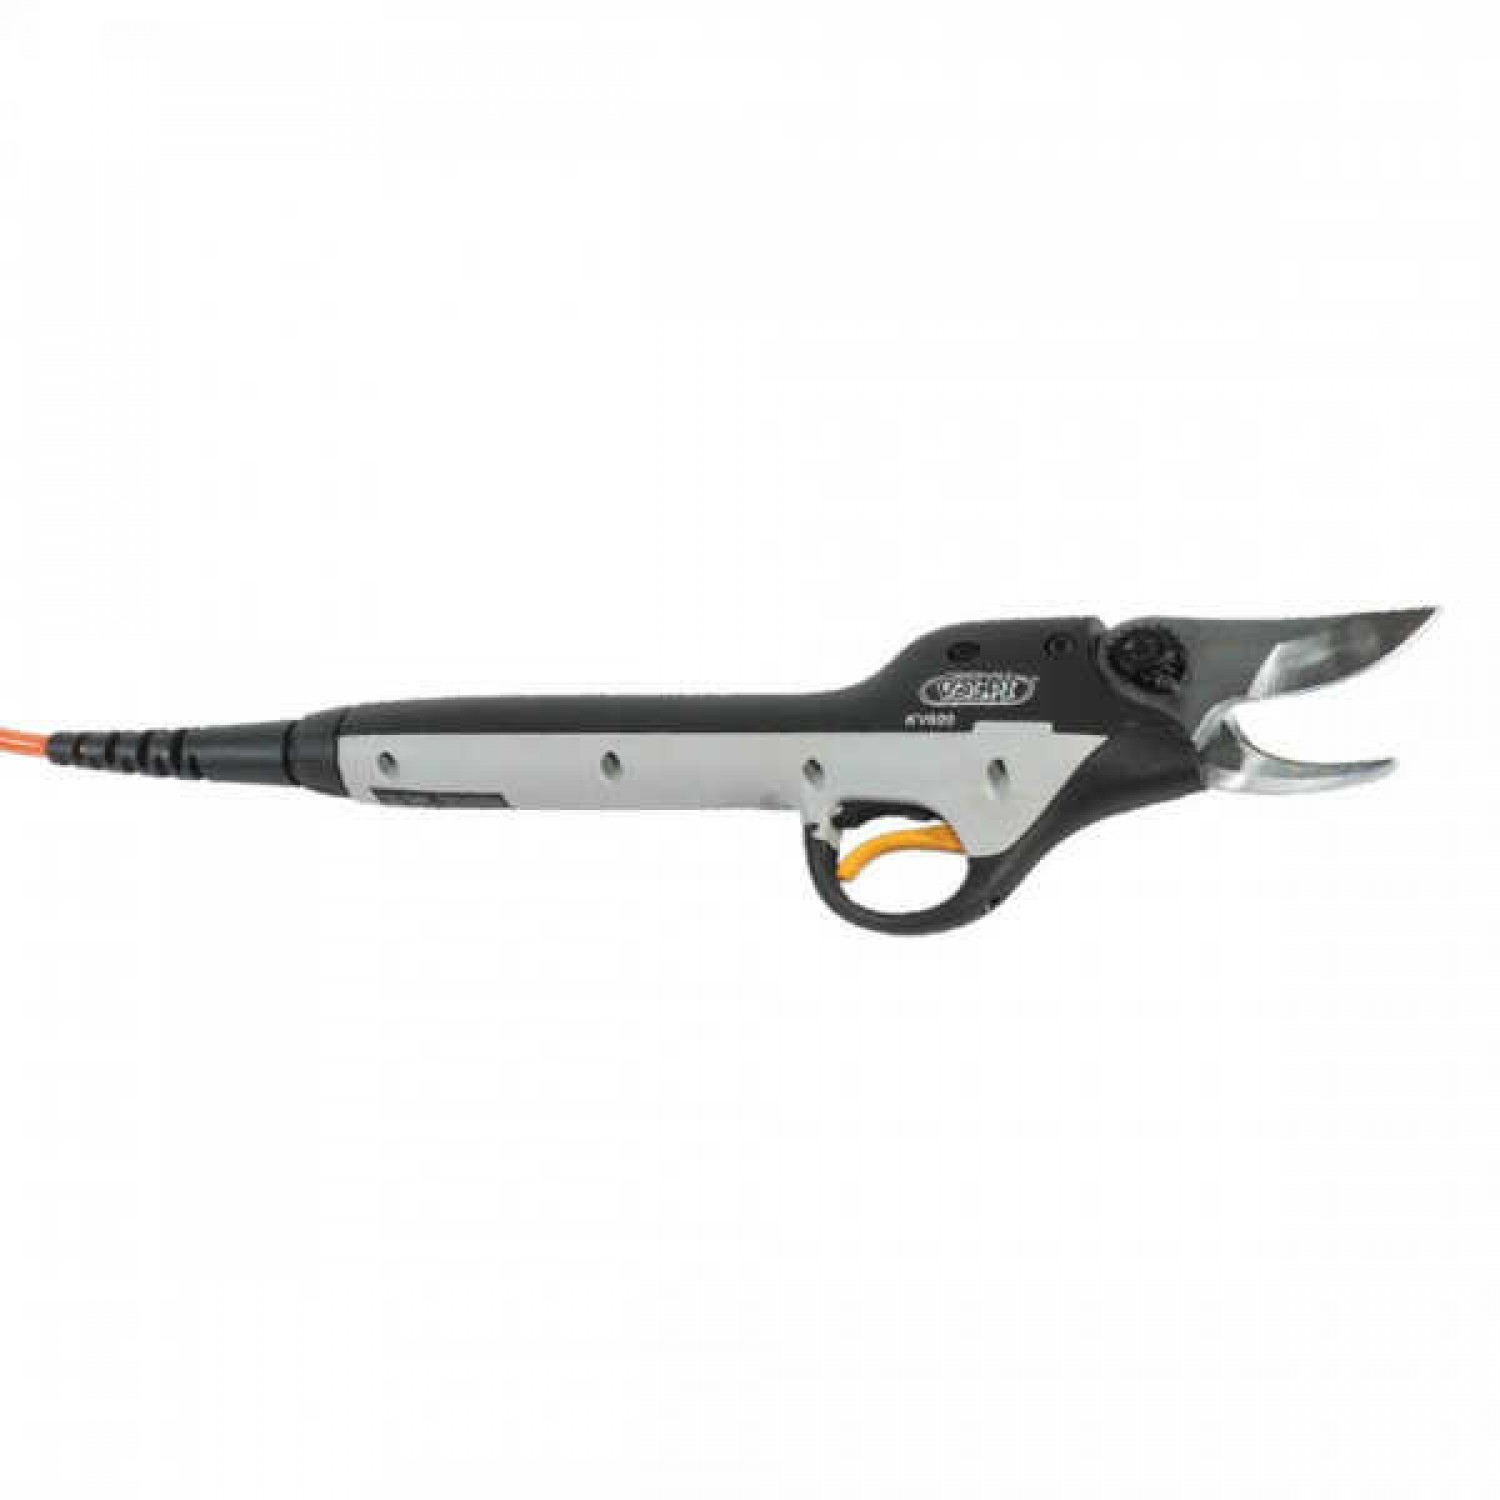 VOLPI KV600 4.4 Ah Lithium Ion Battery-Powered Pruning Shears